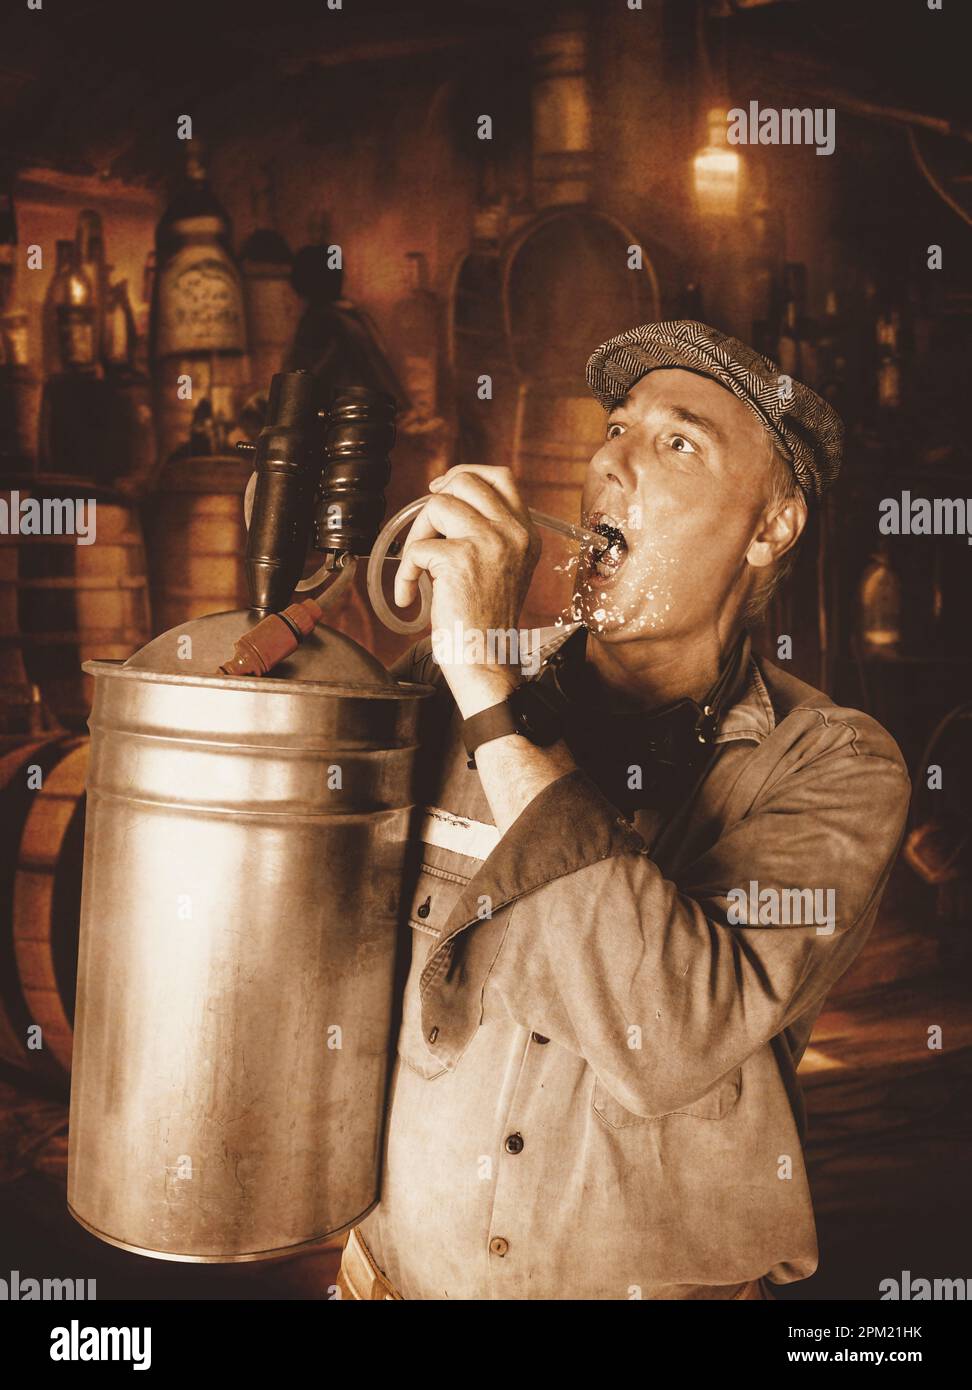 Humorous portrait on a distillery man filling the tank with a hard bootleg beverage Stock Photo